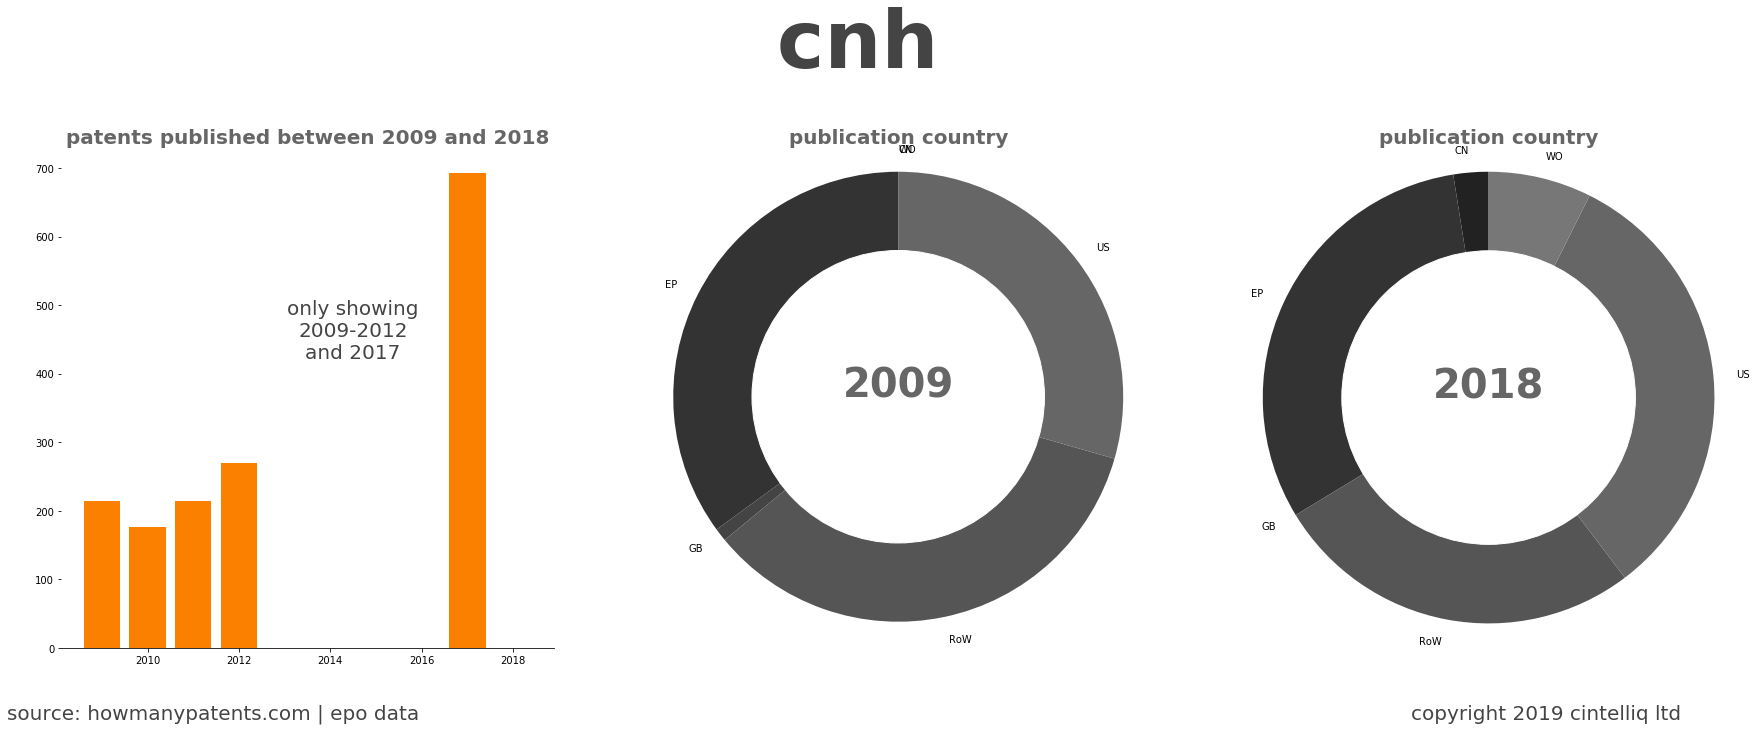 summary of patents for Cnh 